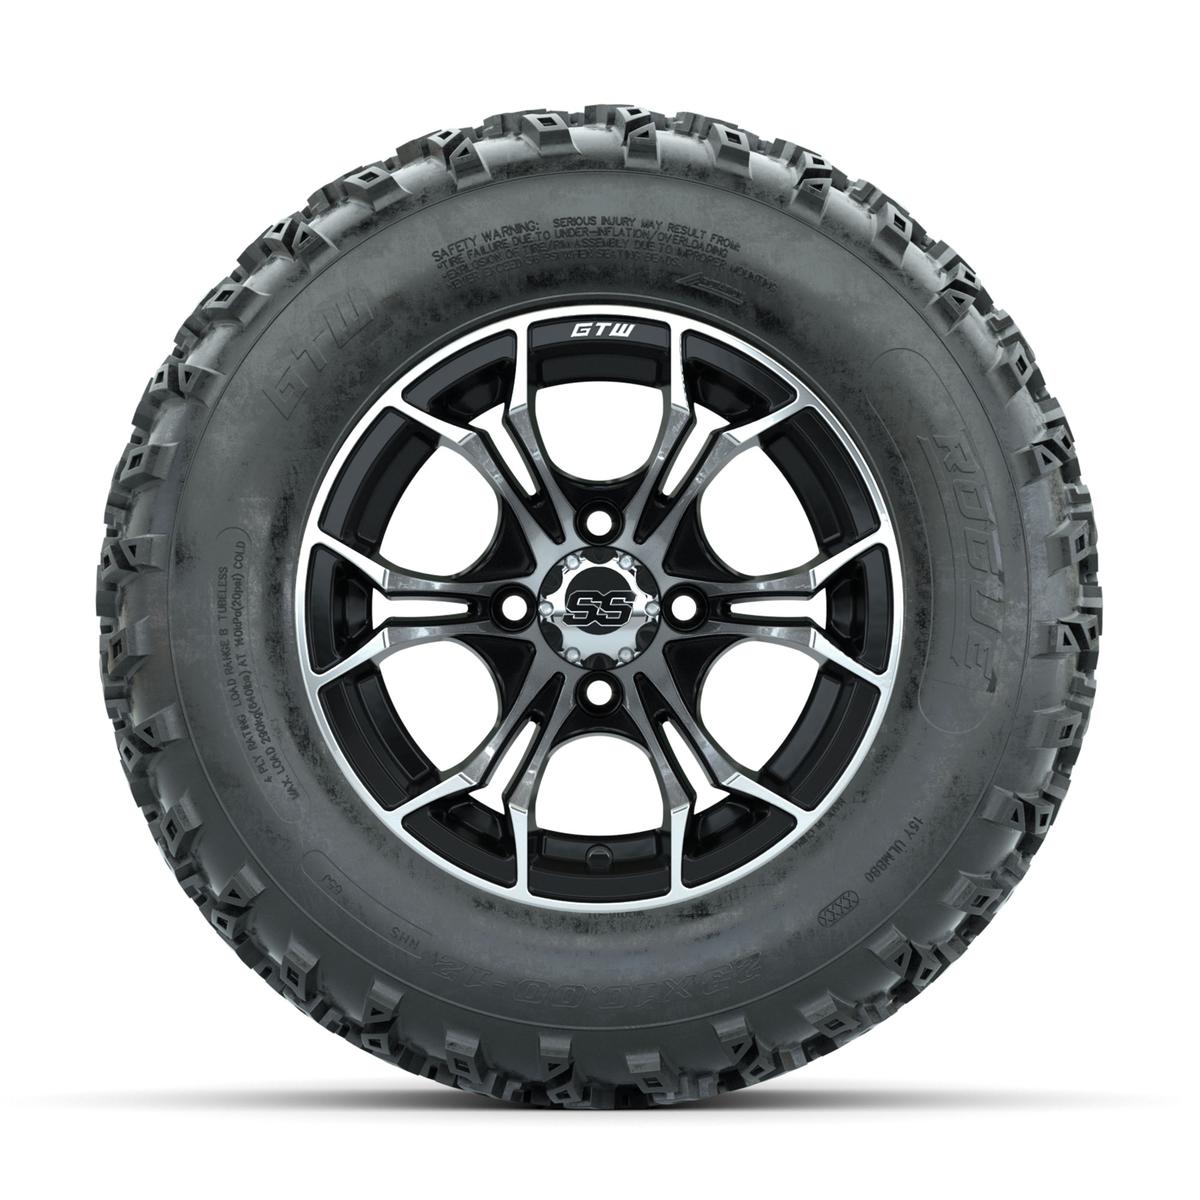 GTW Spyder Machined/Black 12 in Wheels with 23x10.00-12 Rogue All Terrain Tires – Full Set